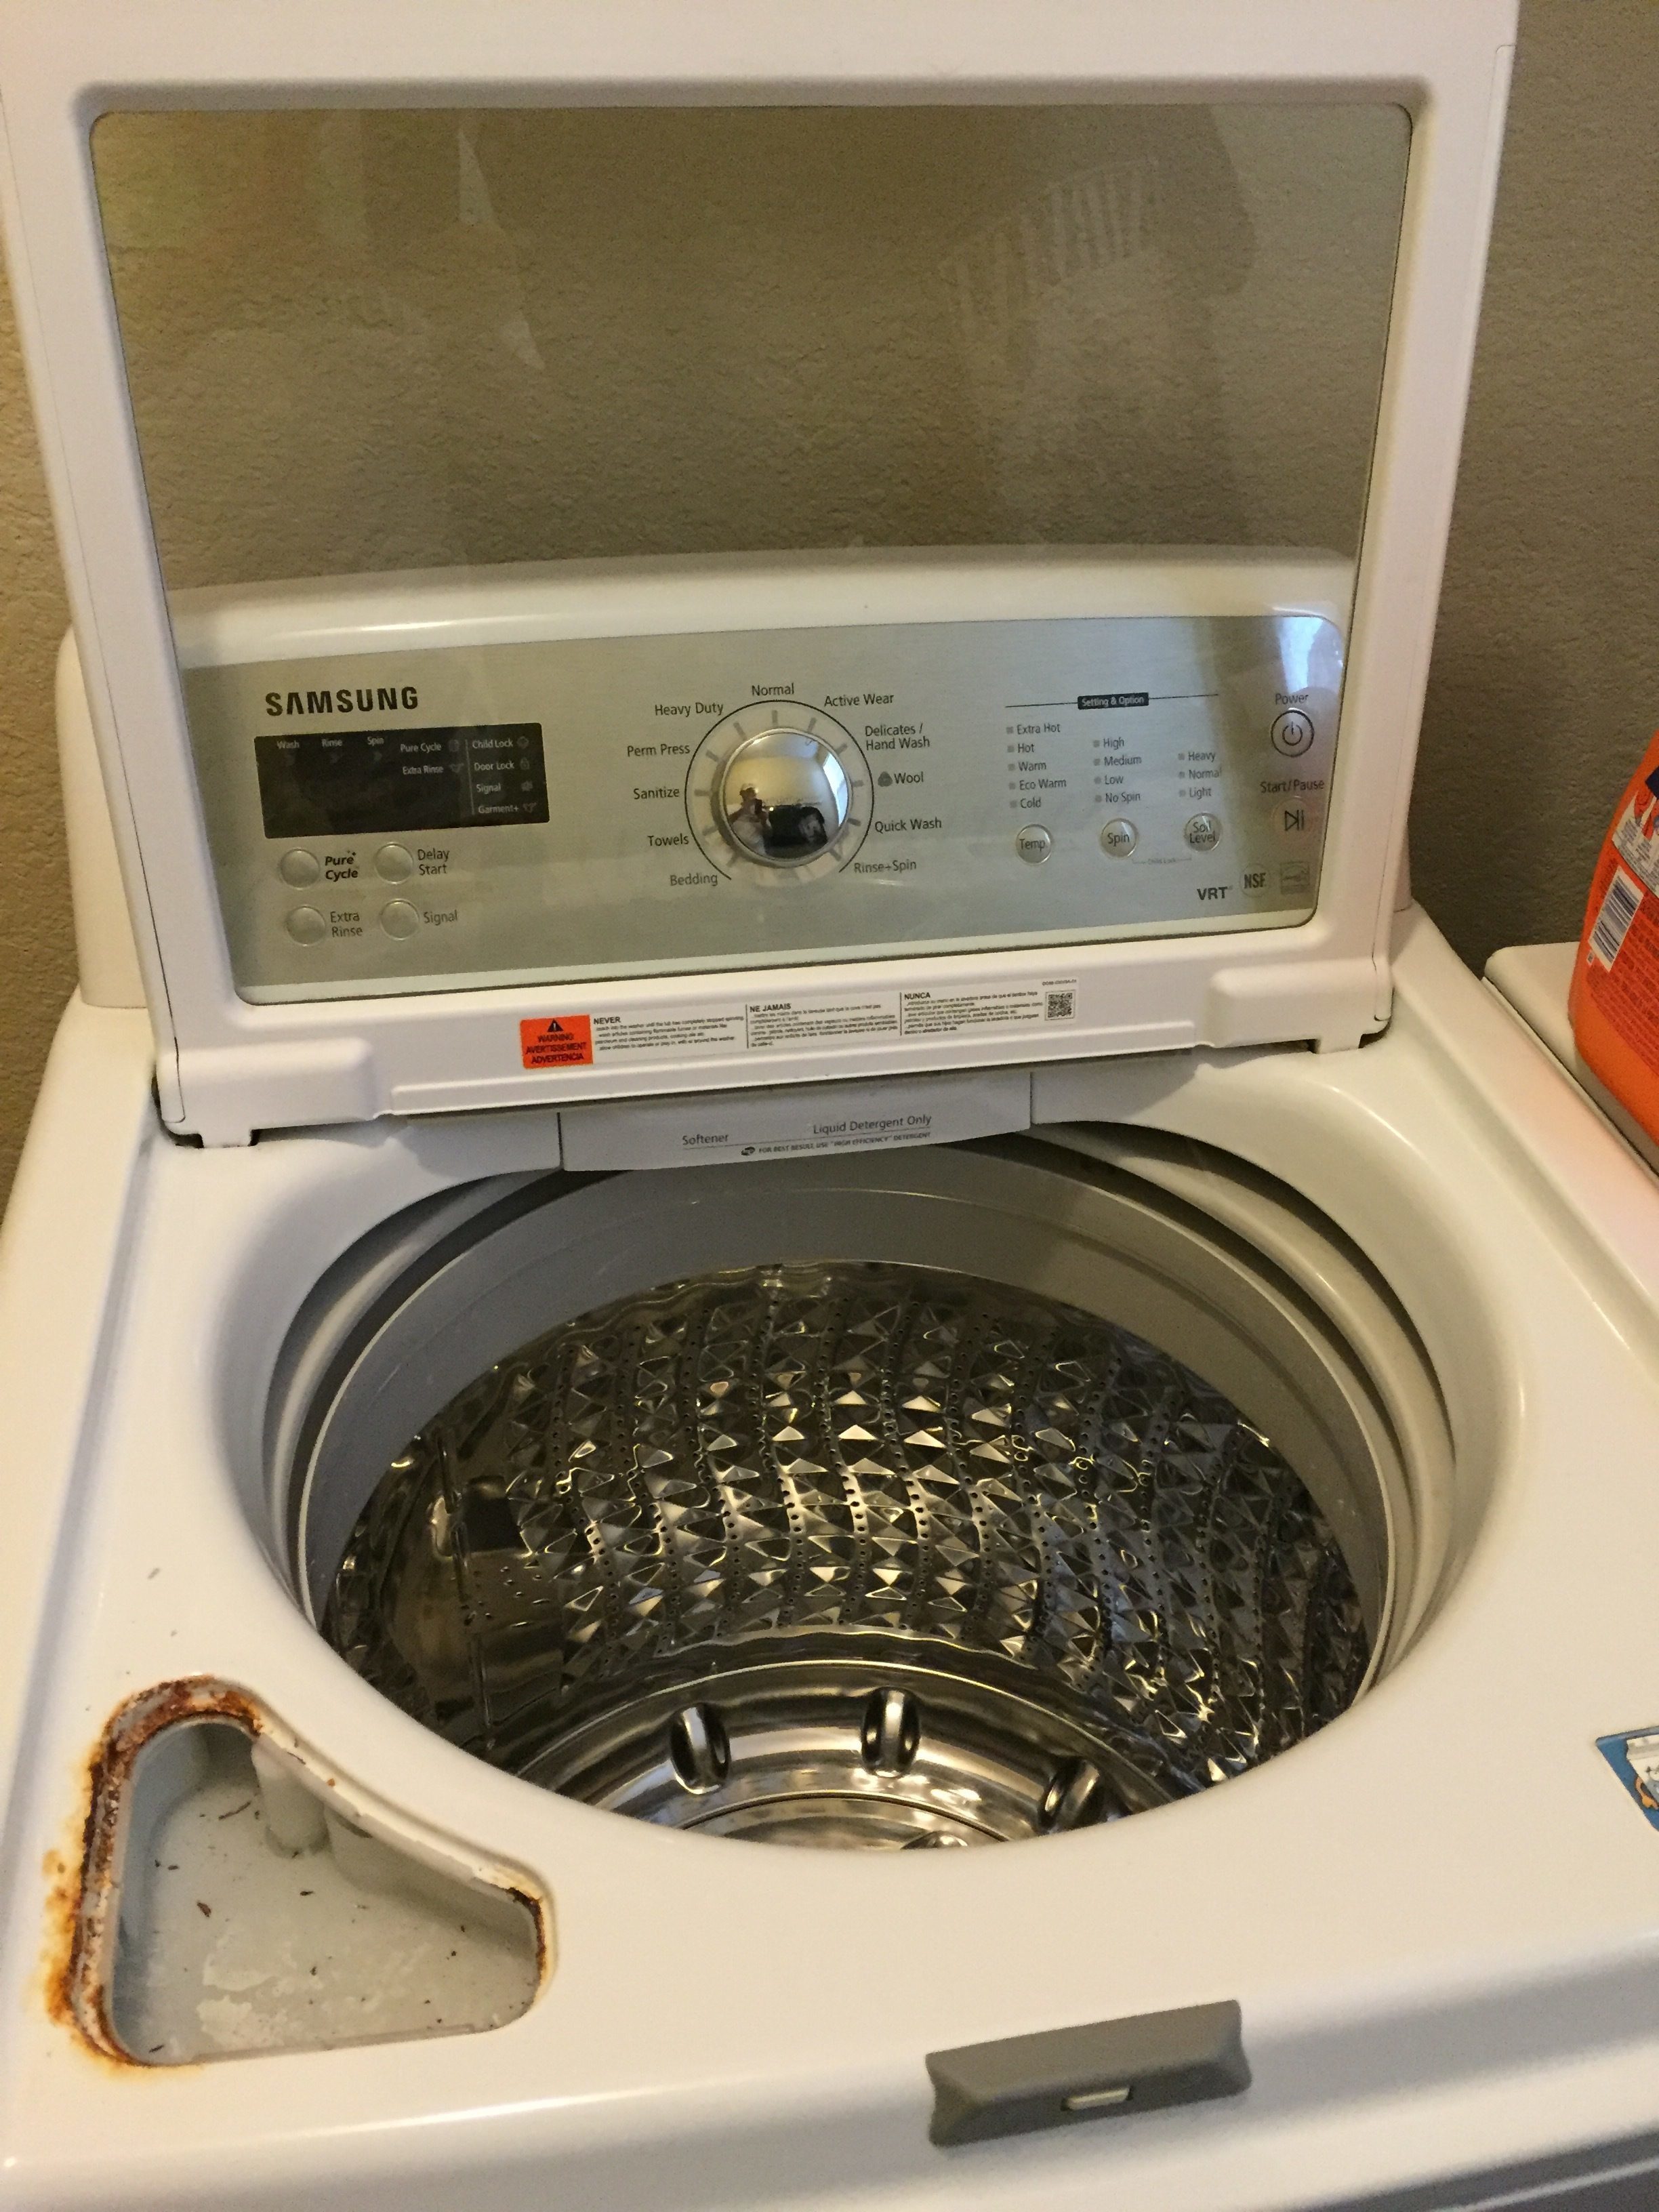 Download Top 1,143 Complaints and Reviews about Samsung Washers | Page 4